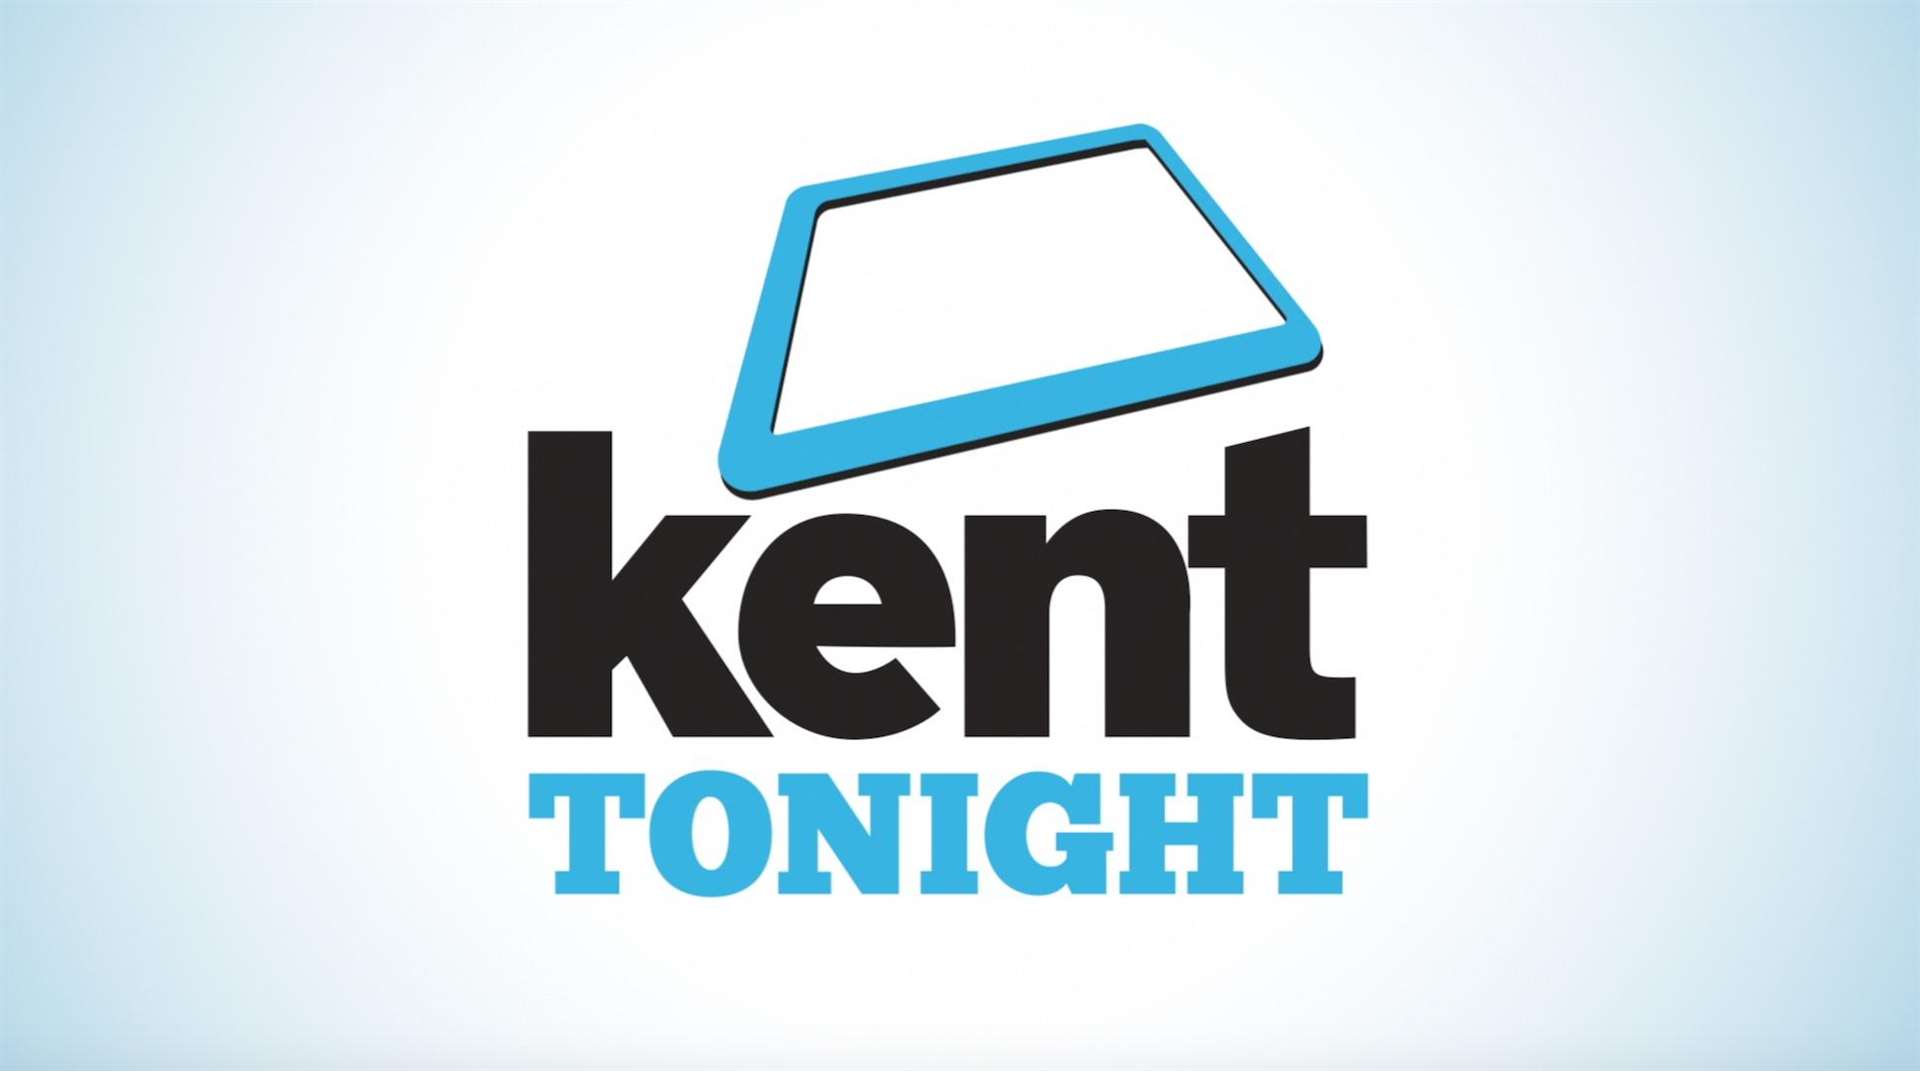 Catch Kent Tonight every weekday at 5.30pm